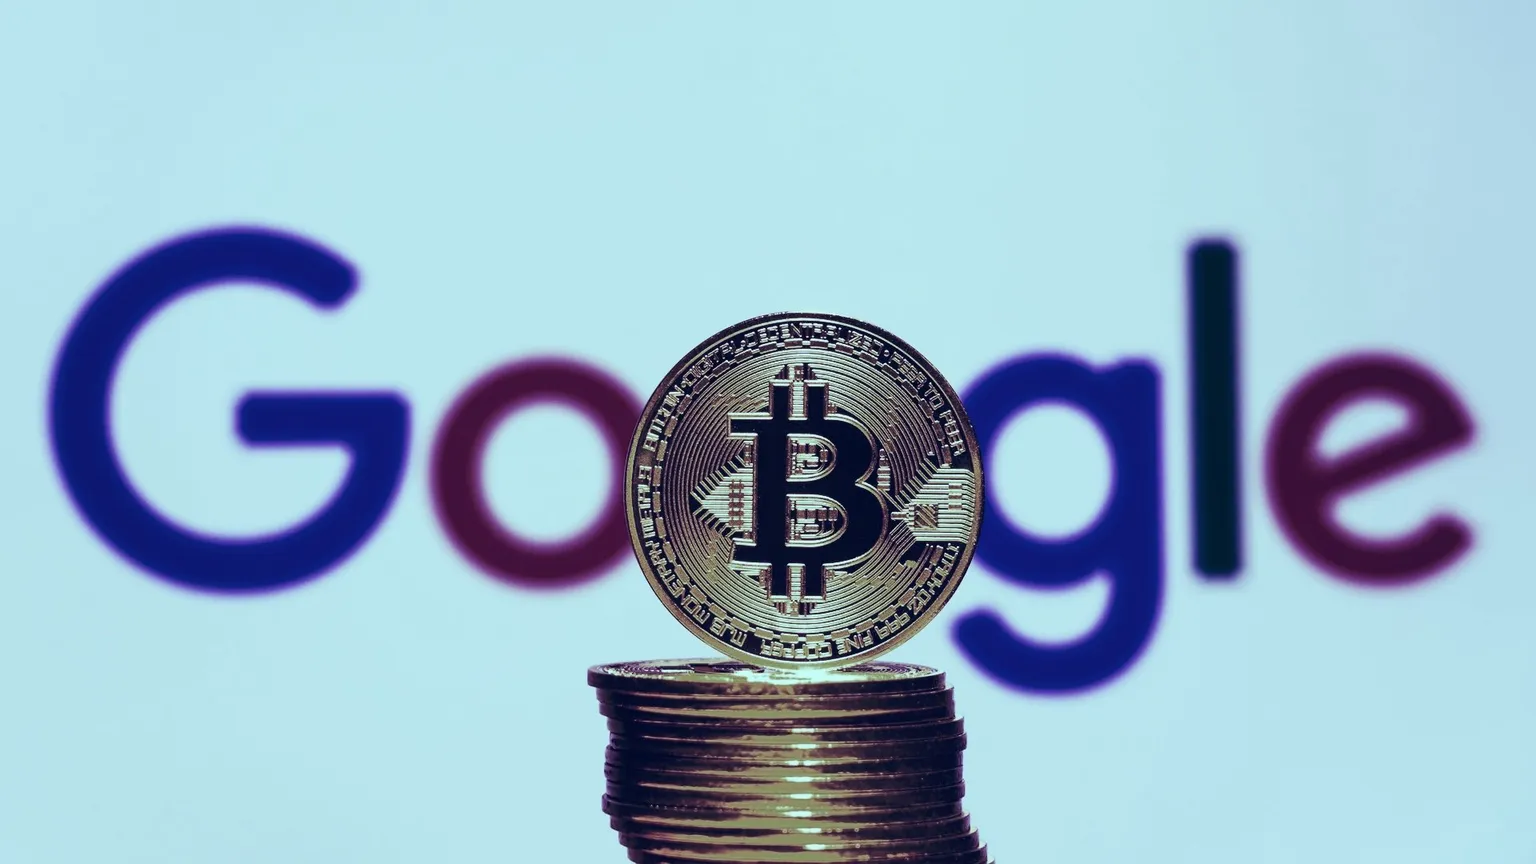 Malicious Google app that appropriated 12 bitcoin could have been caught earlier. Image: Shutterstock